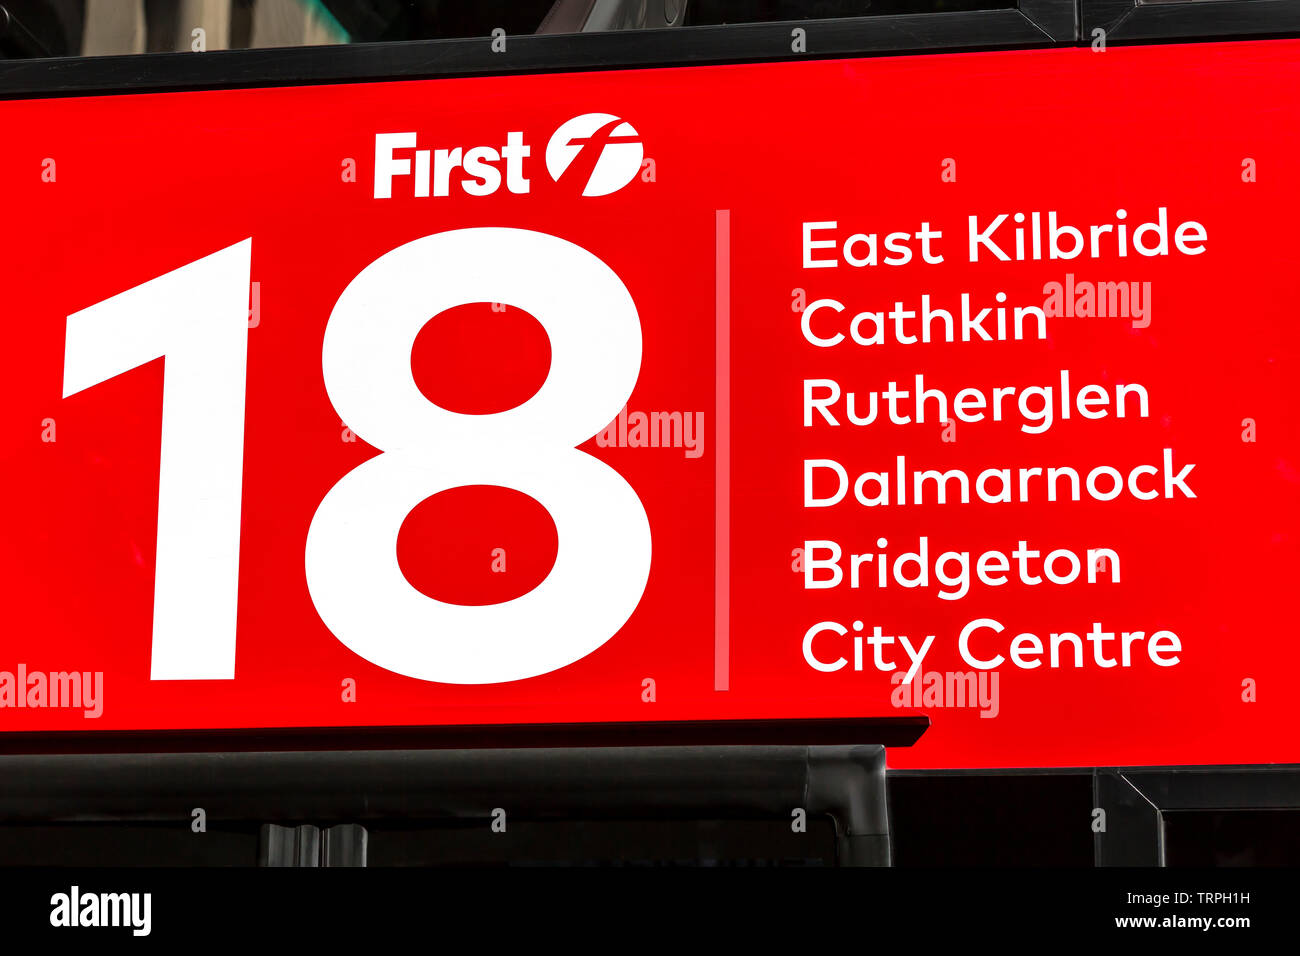 First Bus Glasgow Destinations on the side of a Number 18, Scotland, UK Stock Photo